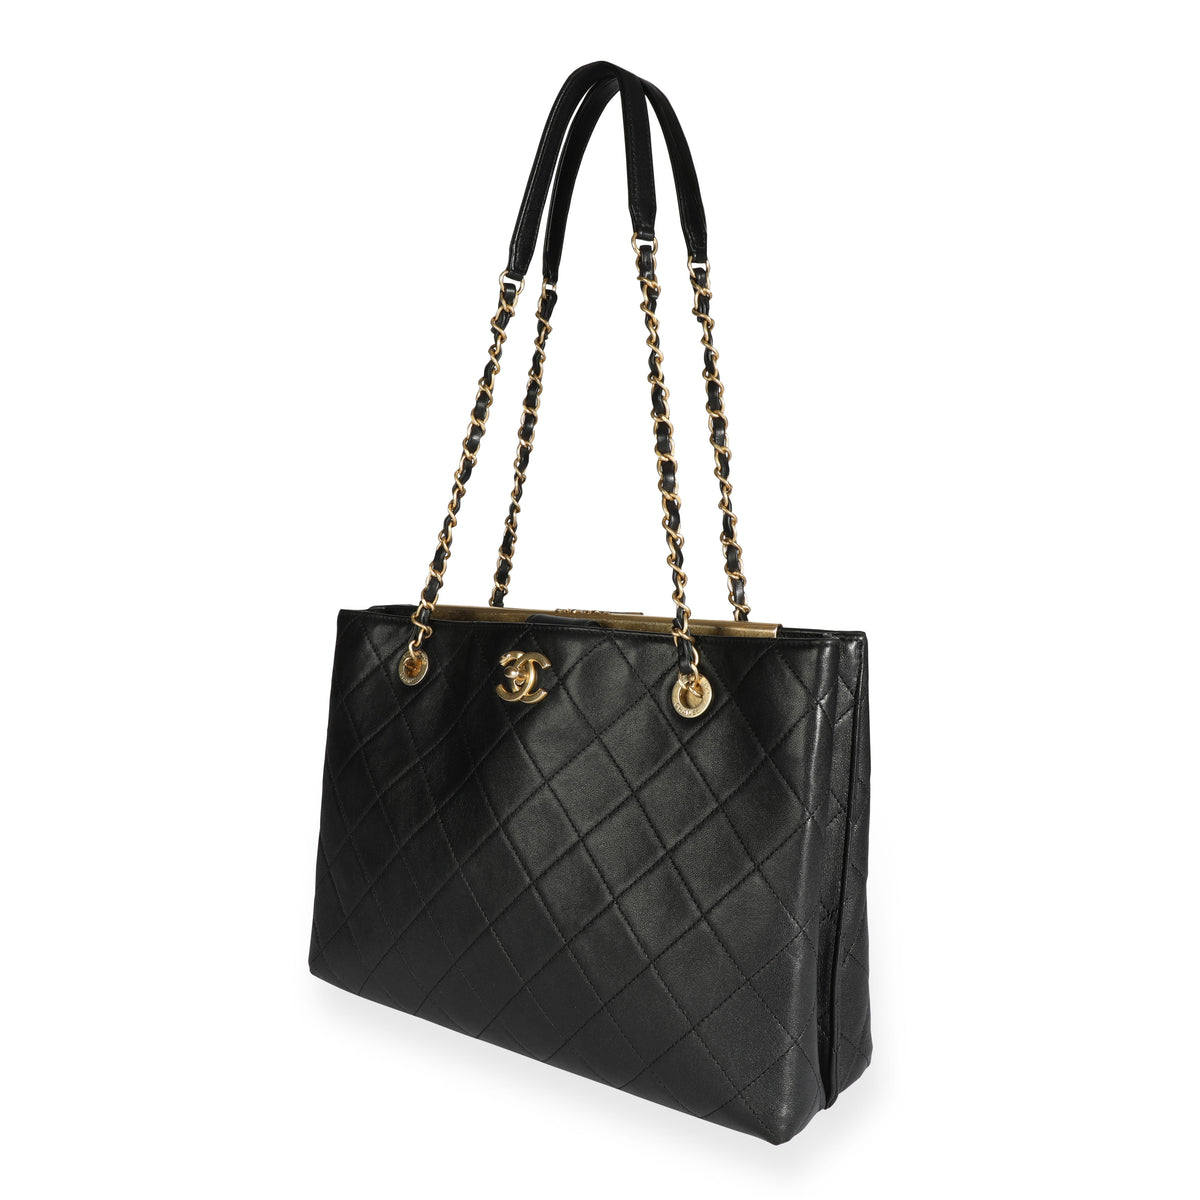 Chanel Black Quilted Lambskin Large Shopping Bag, myGemma